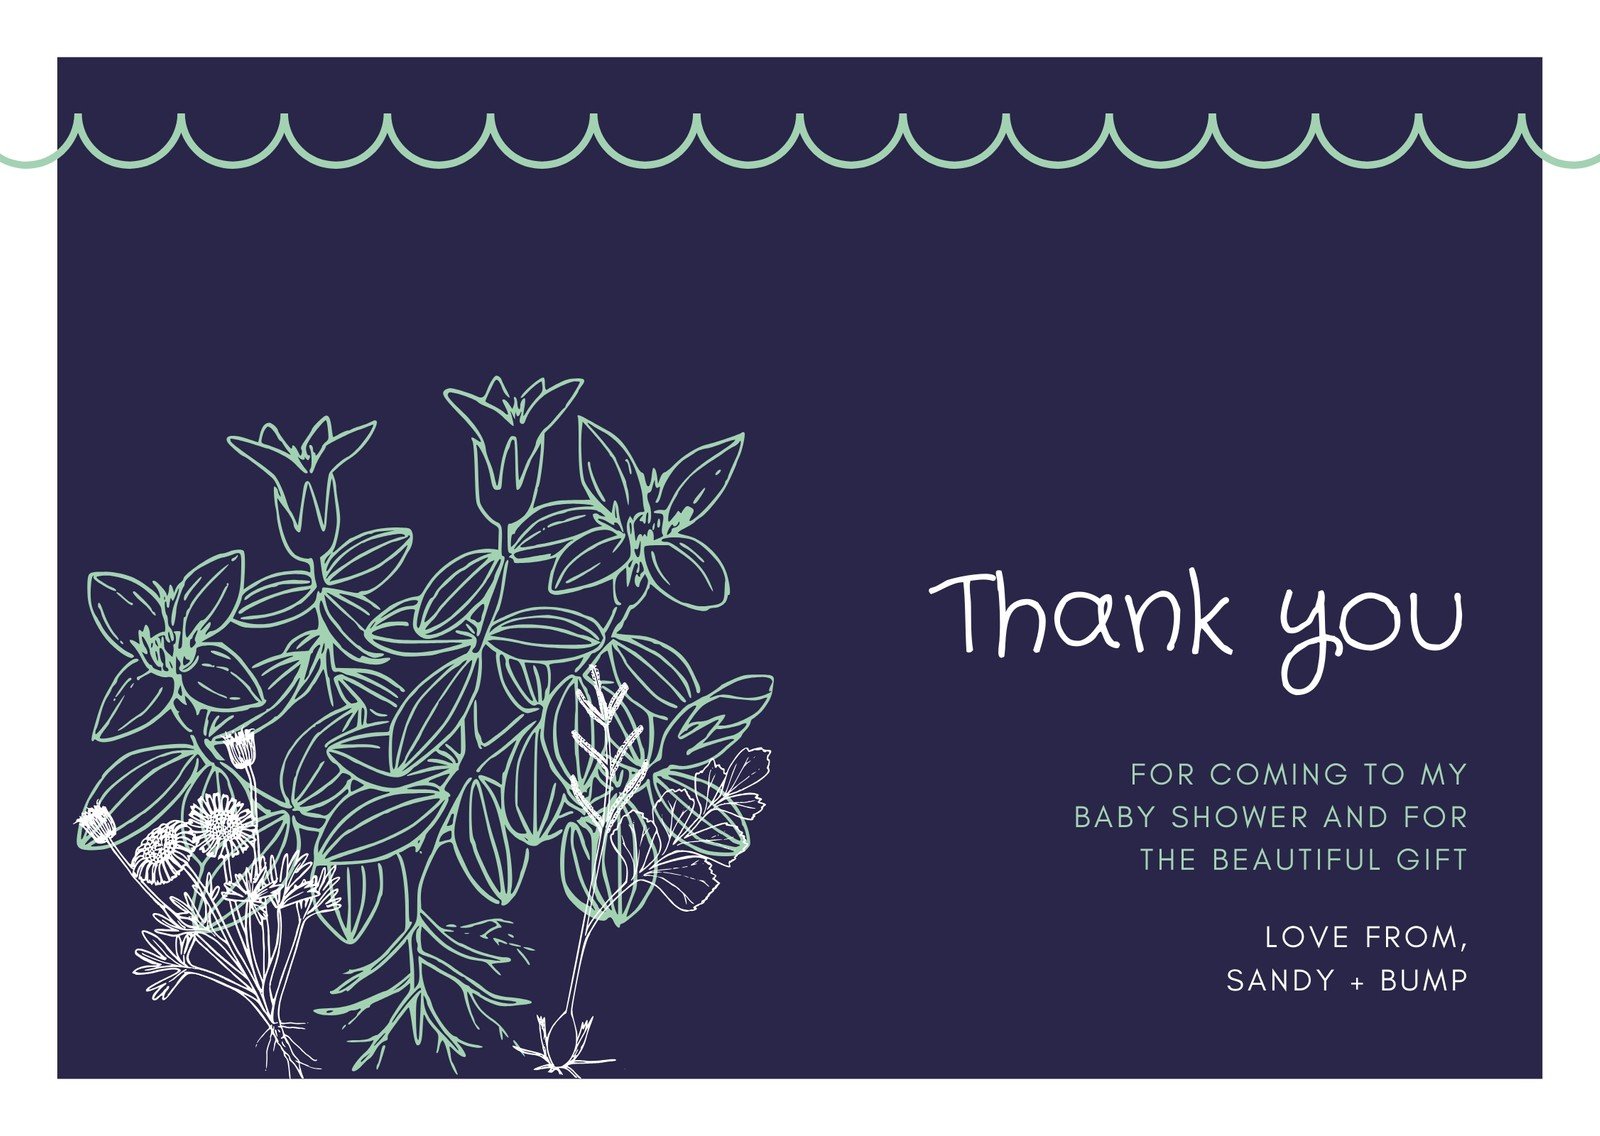 Customize 25+ Baby Shower Thank You Cards Templates Online - Canva Pertaining To Template For Baby Shower Thank You Cards